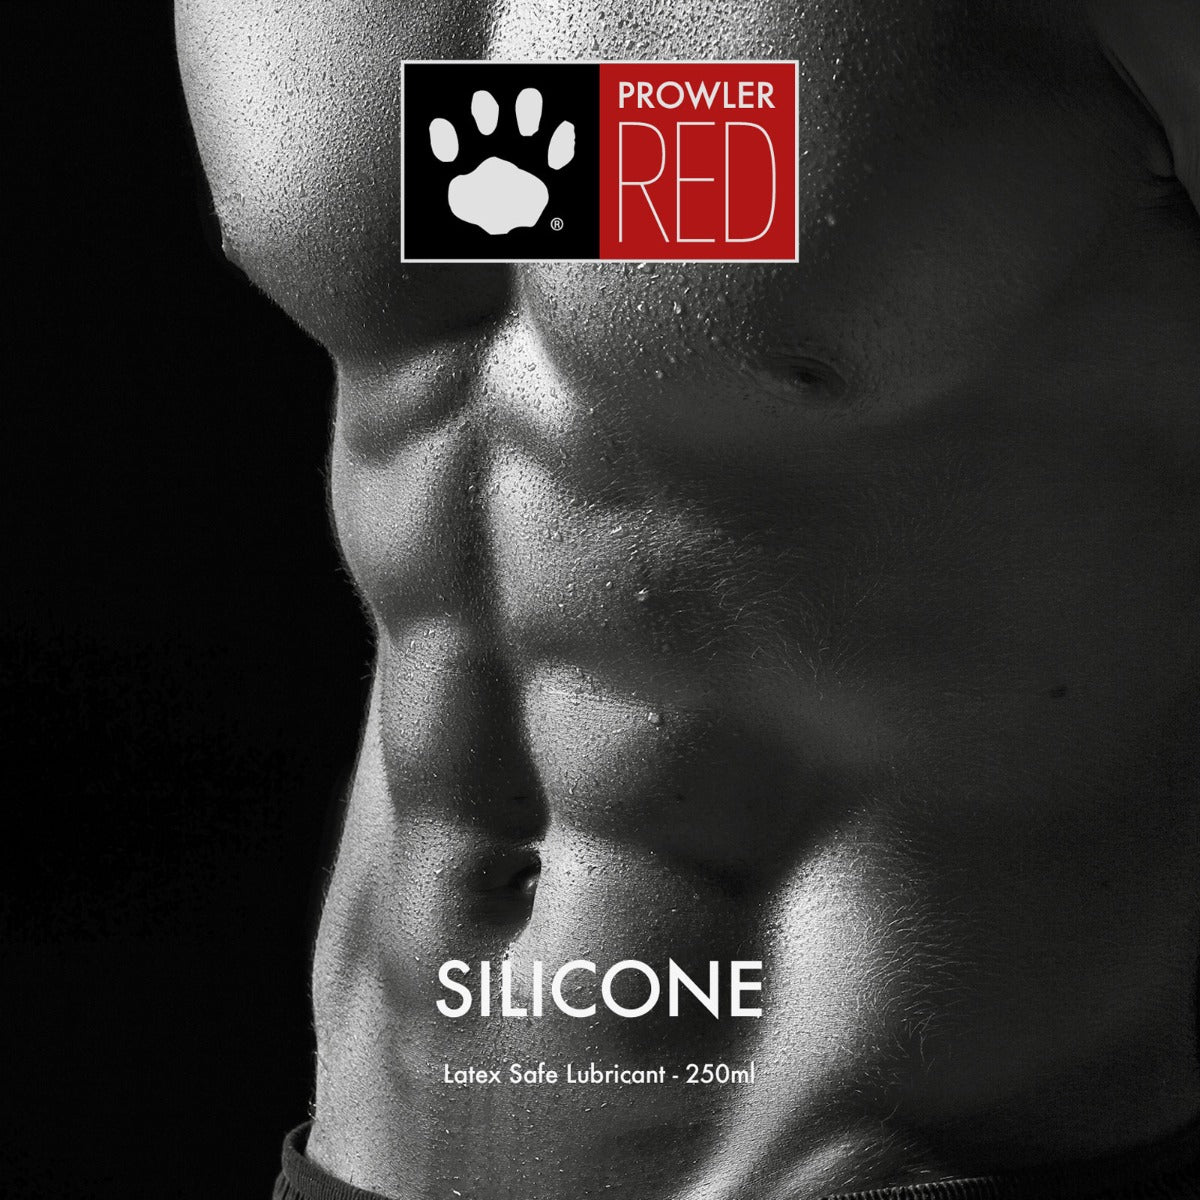 Silicone Based Lube Prowler RED Silicone Based Lube 250ml   